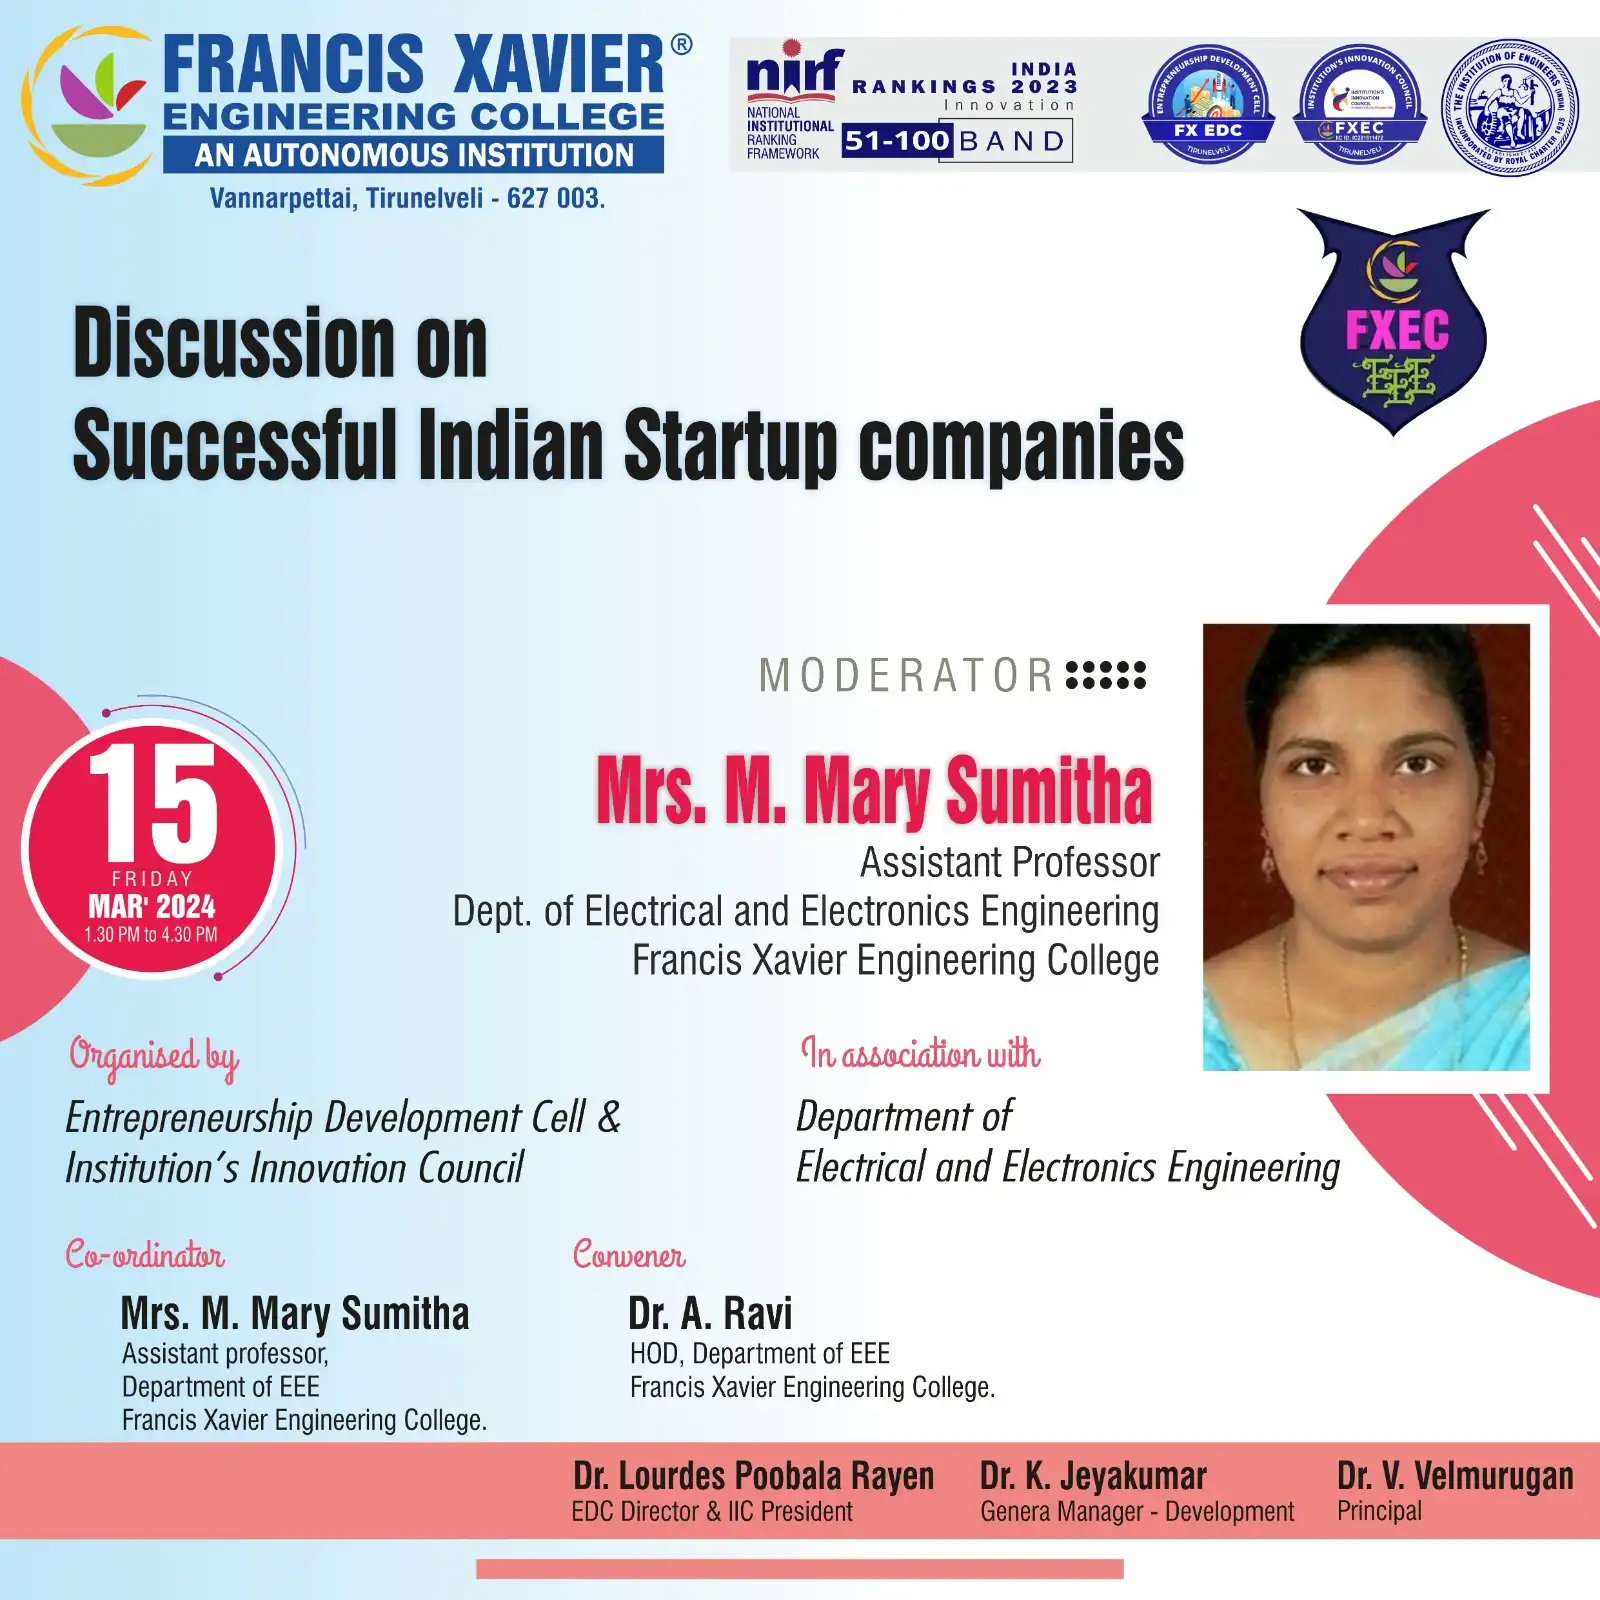     Discussion on Successful Indian Startup companies 